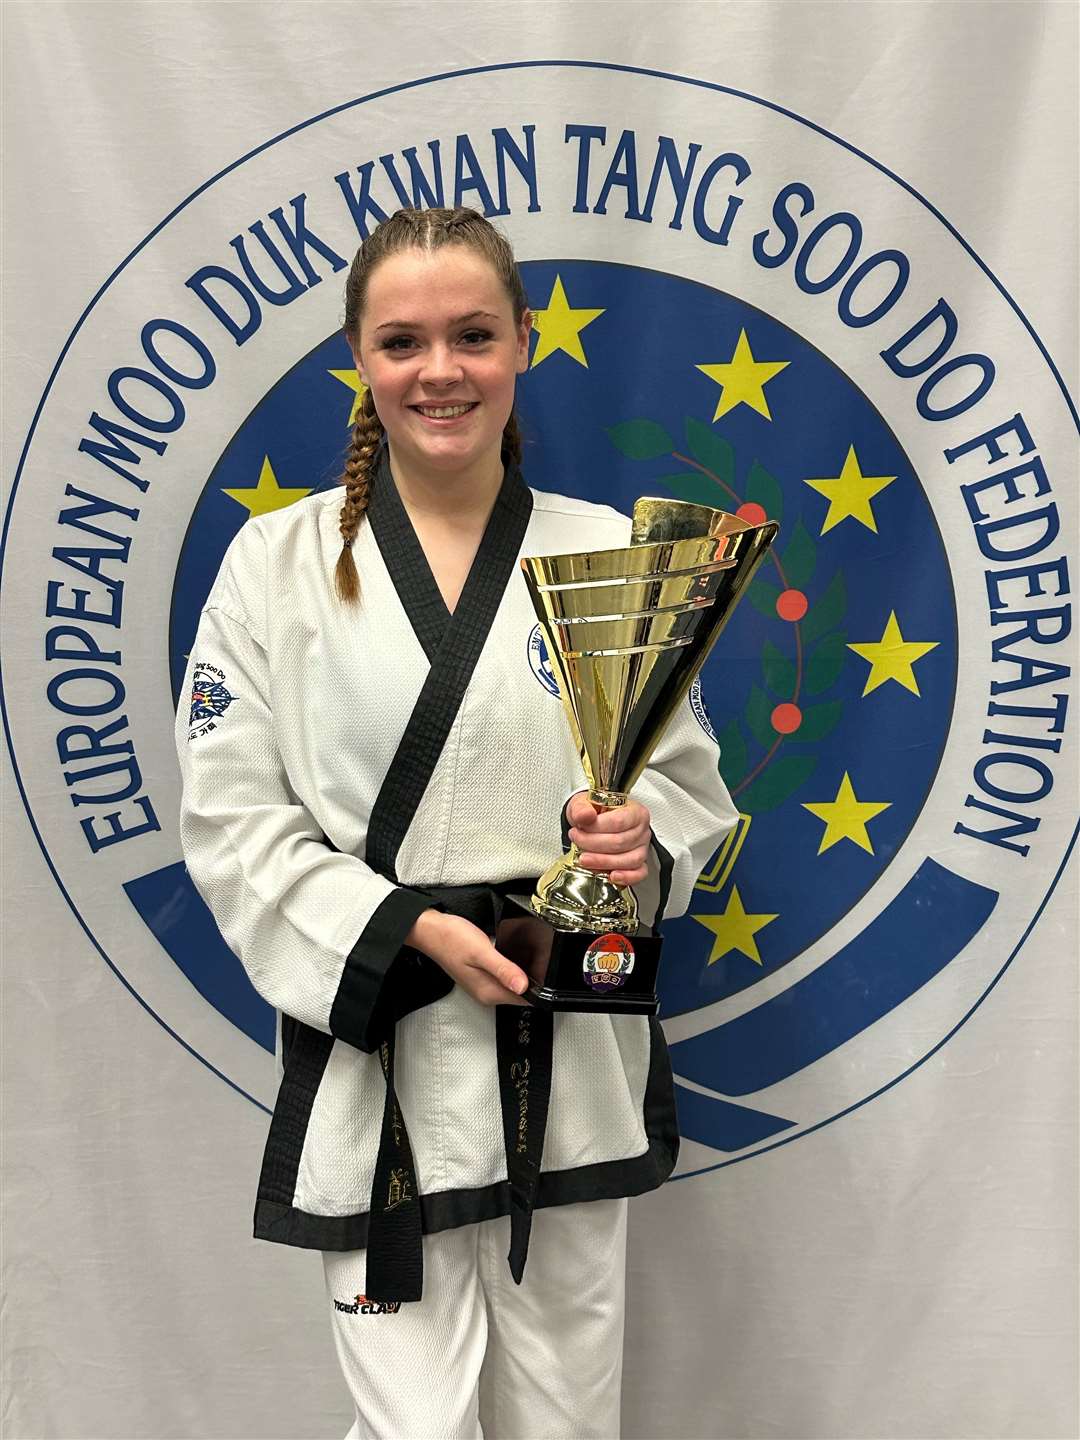 Inverness Tang Soo Do athlete Laura Stewart medalled in all five of her categories at the Dutch Open Championships to be crowned adult black belt grand champion.